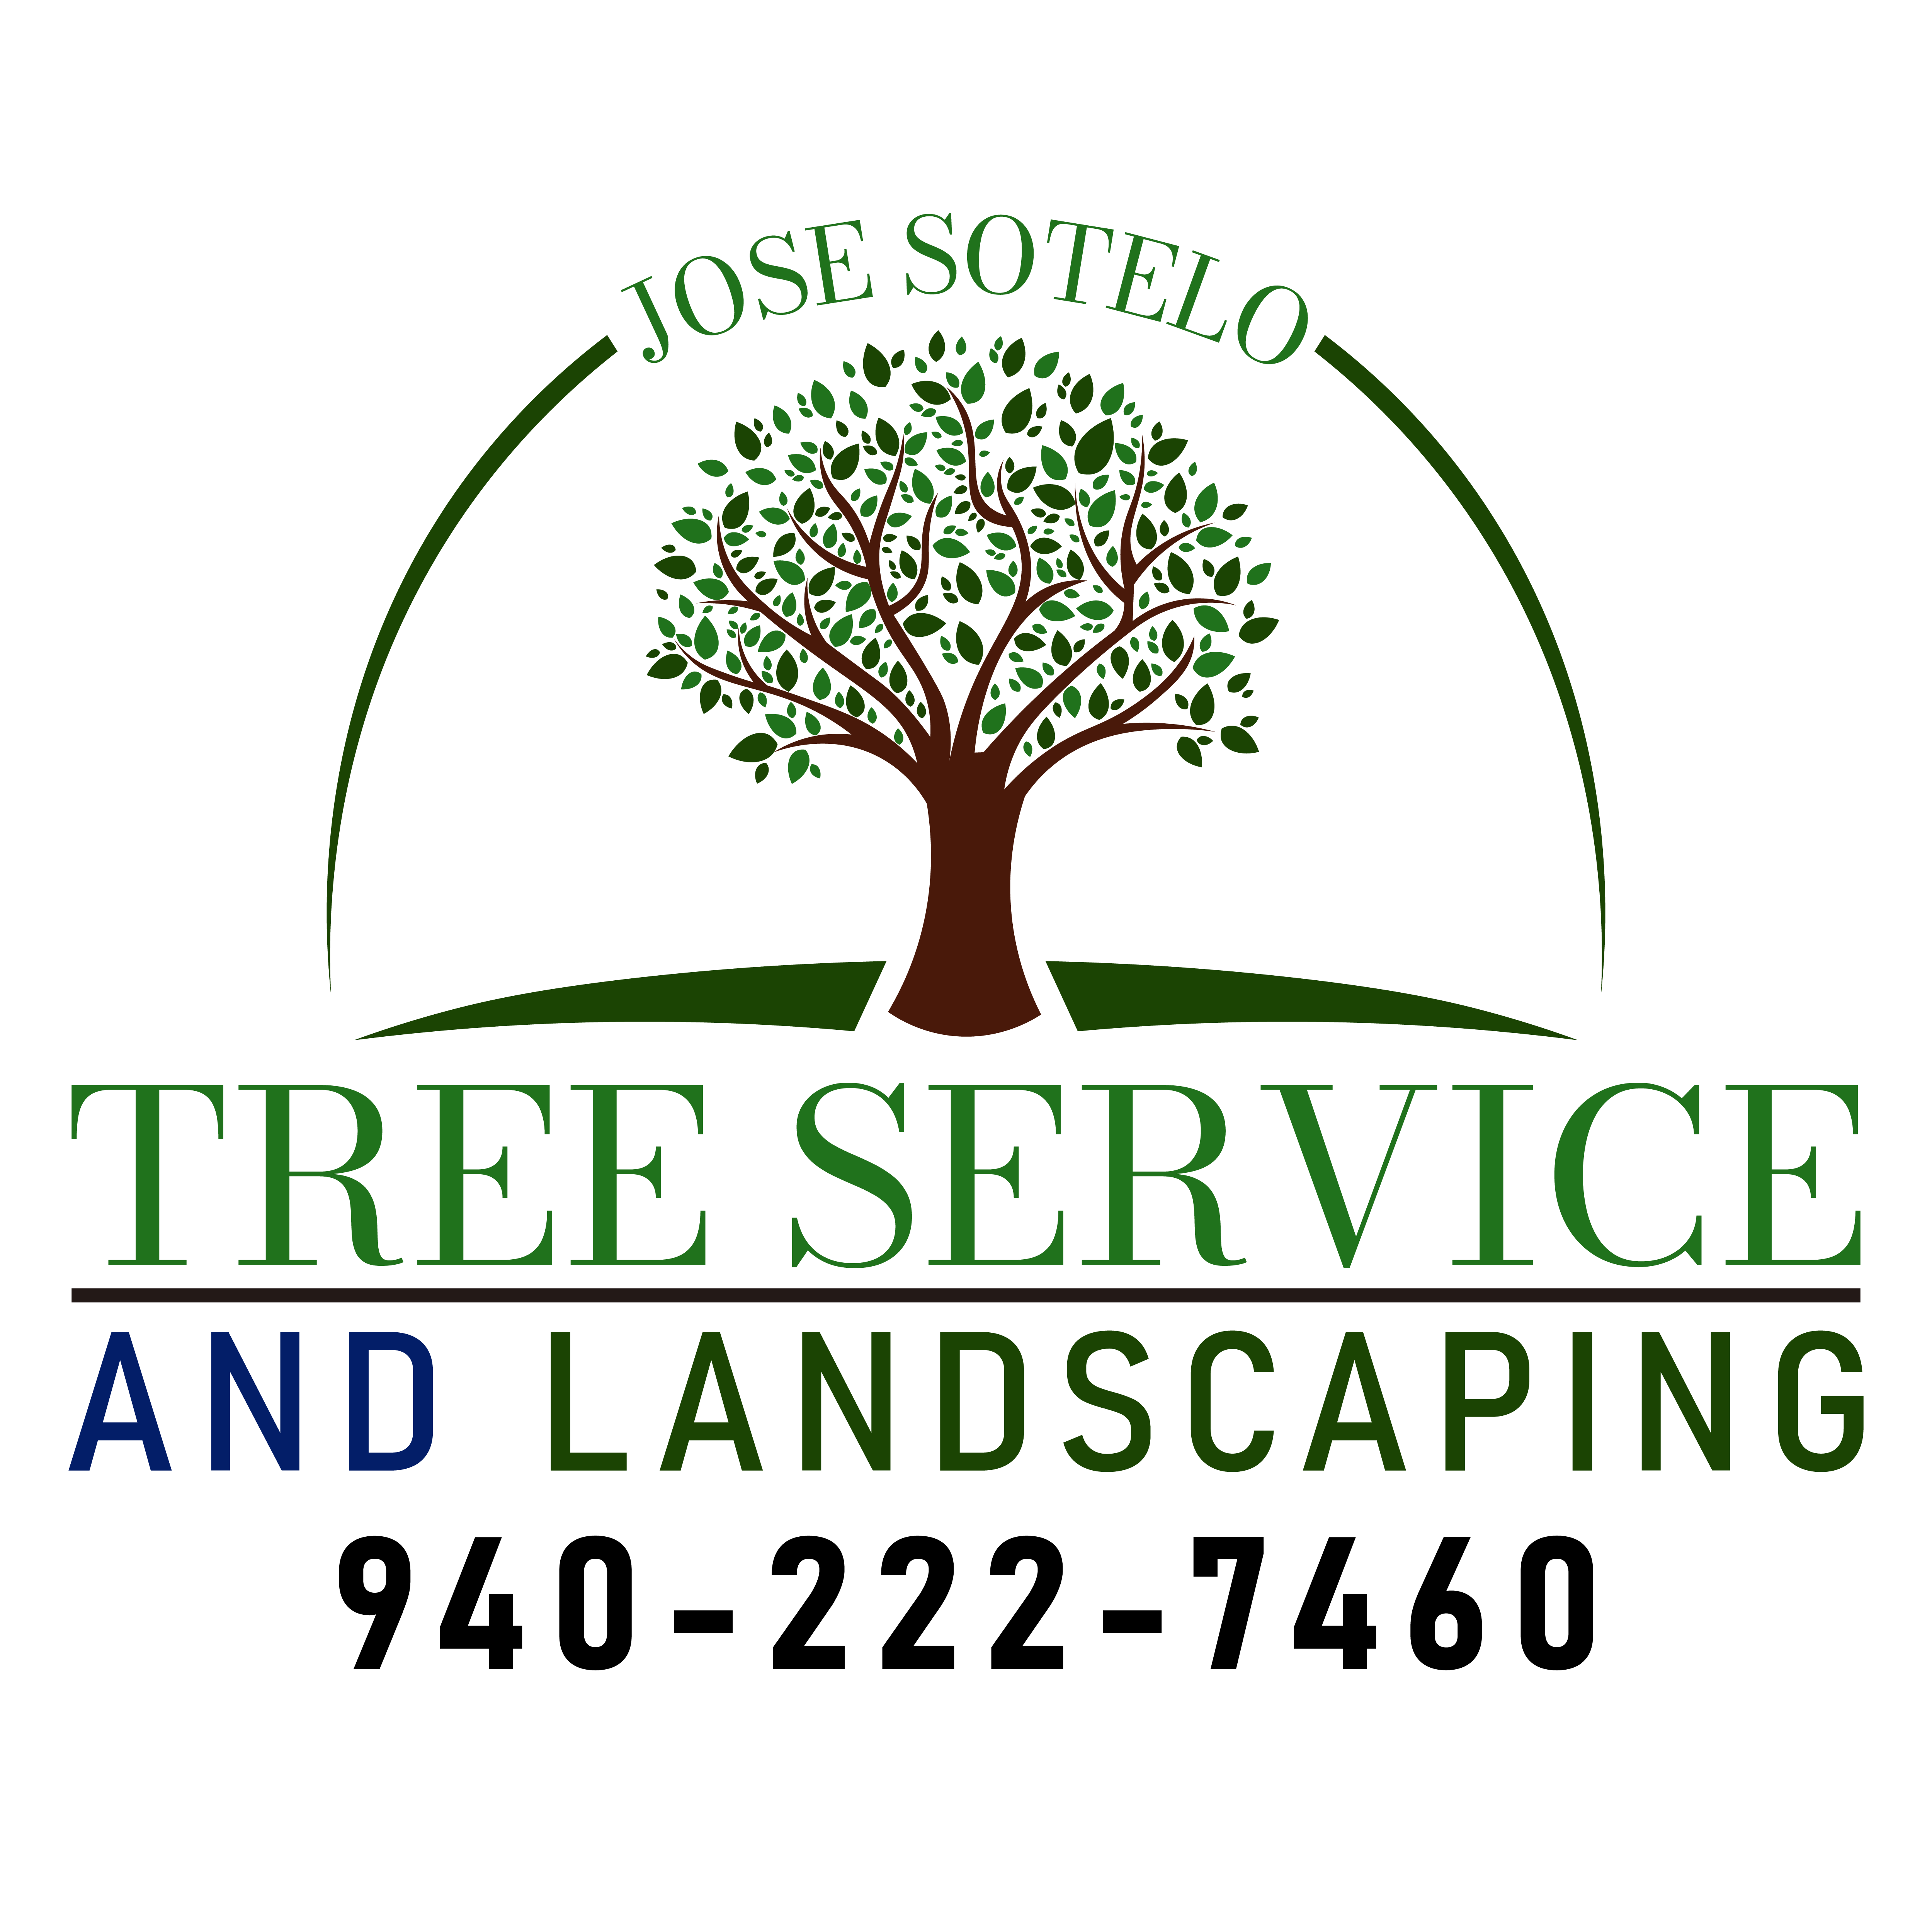 Jose Sotelo Landscaping and Tree Service